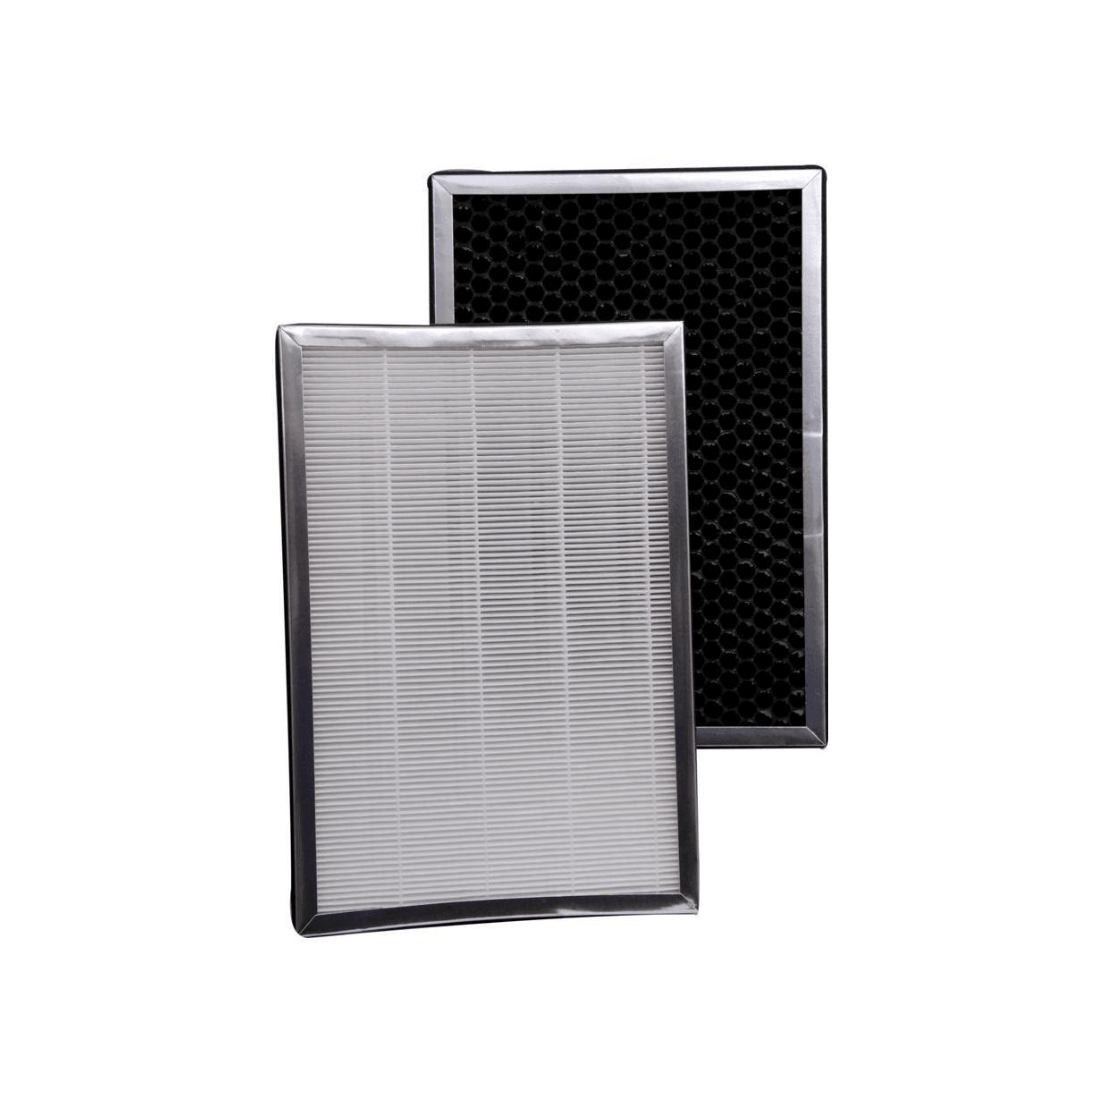 Replacement Filter for Gama Pure 333® Atlanta Healthcare India